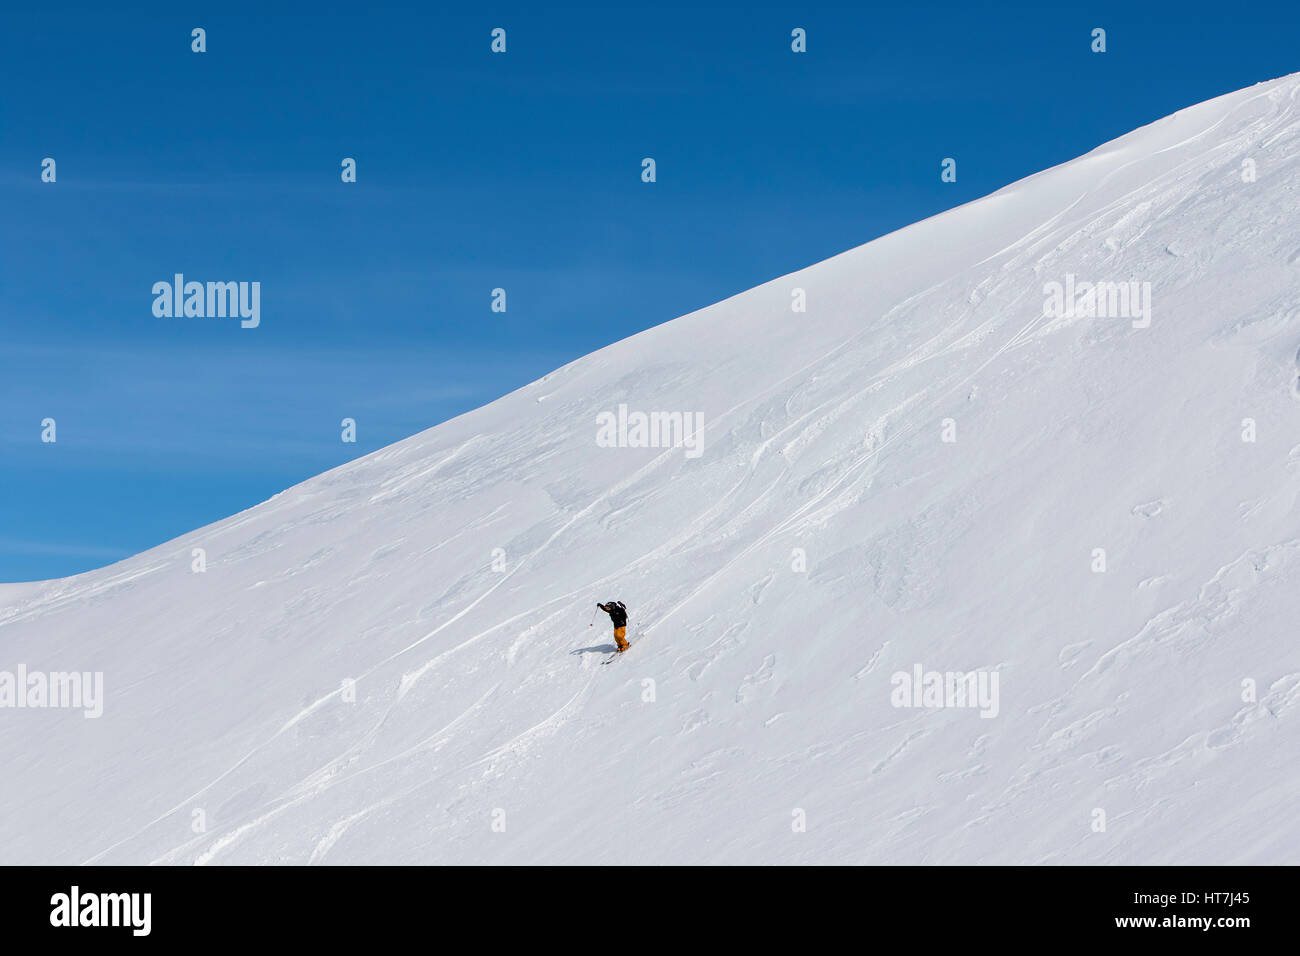 A Skier Straight Lines Over Other Tracks And Puts His Hands Up In The Air In Excitement In The Backcountry Around Cerro Catedral In Argentina Stock Photo